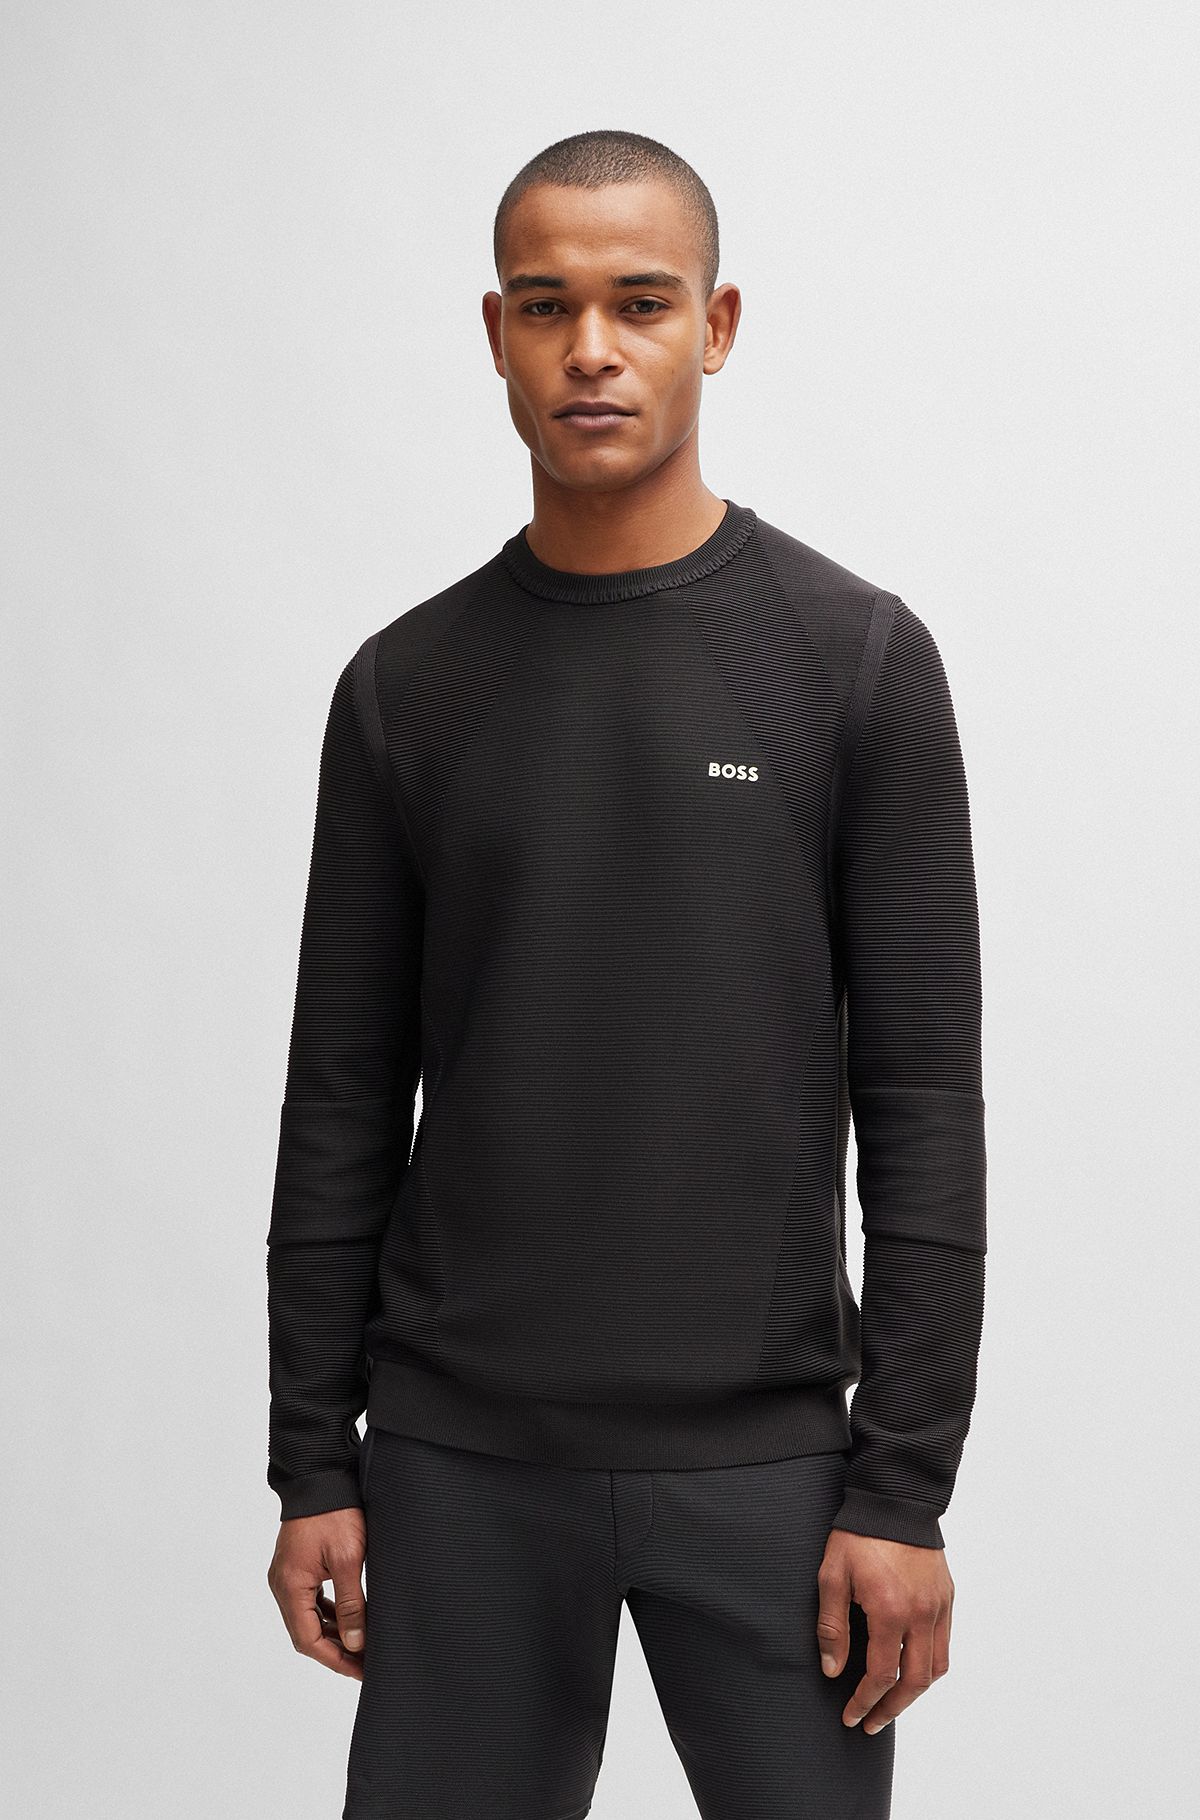 Regular-fit sweater with contrast logo and crew neck, Dark Grey